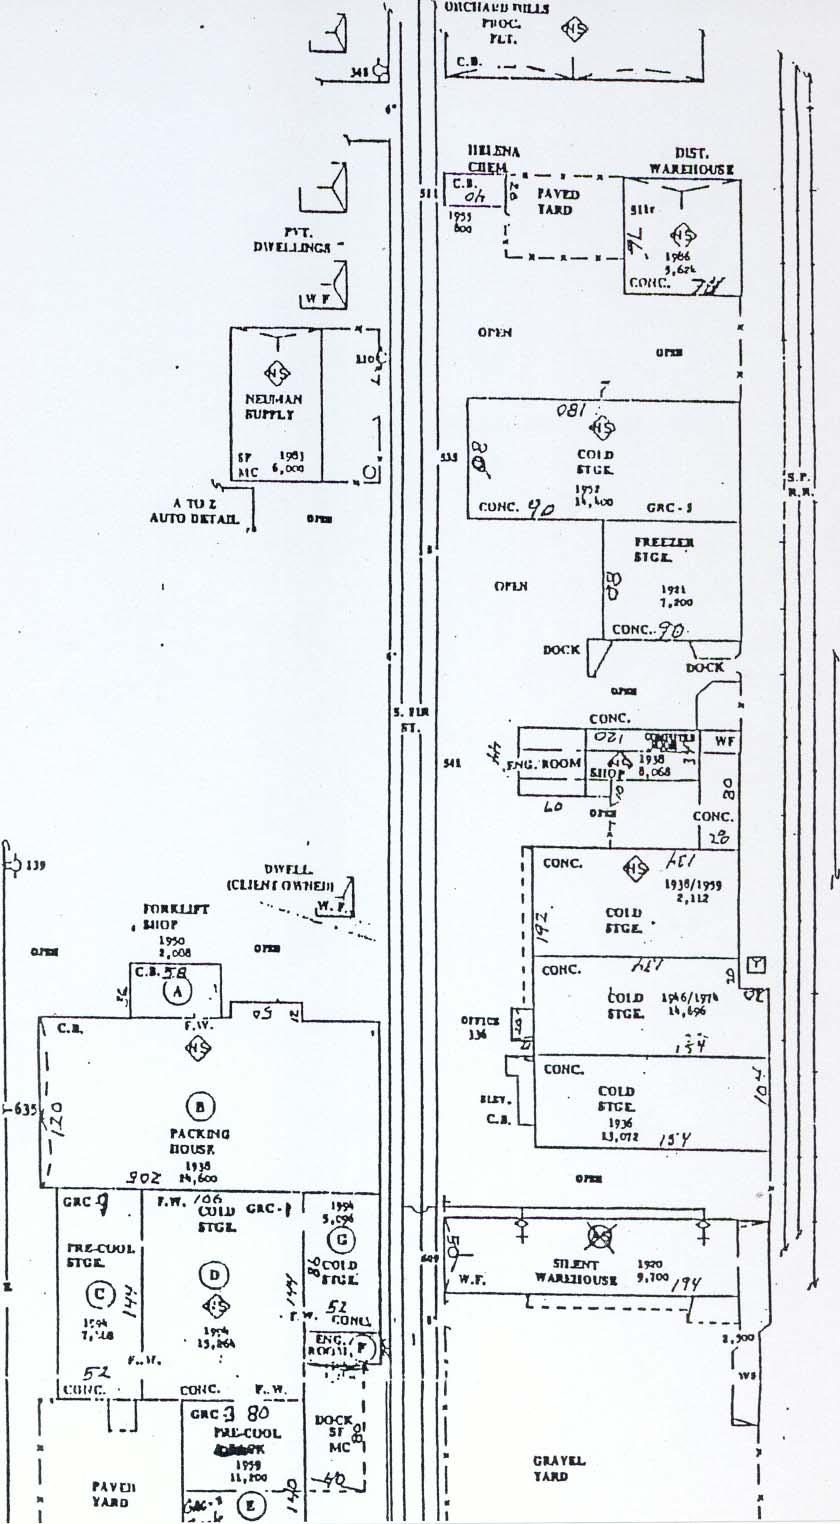 GRC COMPLEX NAUMES, INC. Building Layout and Tax Lot Outline GRC Barnum Bldg (2-story Cold Storage) Barnum Freezer (3-story Freezer Storage) GRC COMPLEX 37-1W-30CA Tax Lot #7101 2.